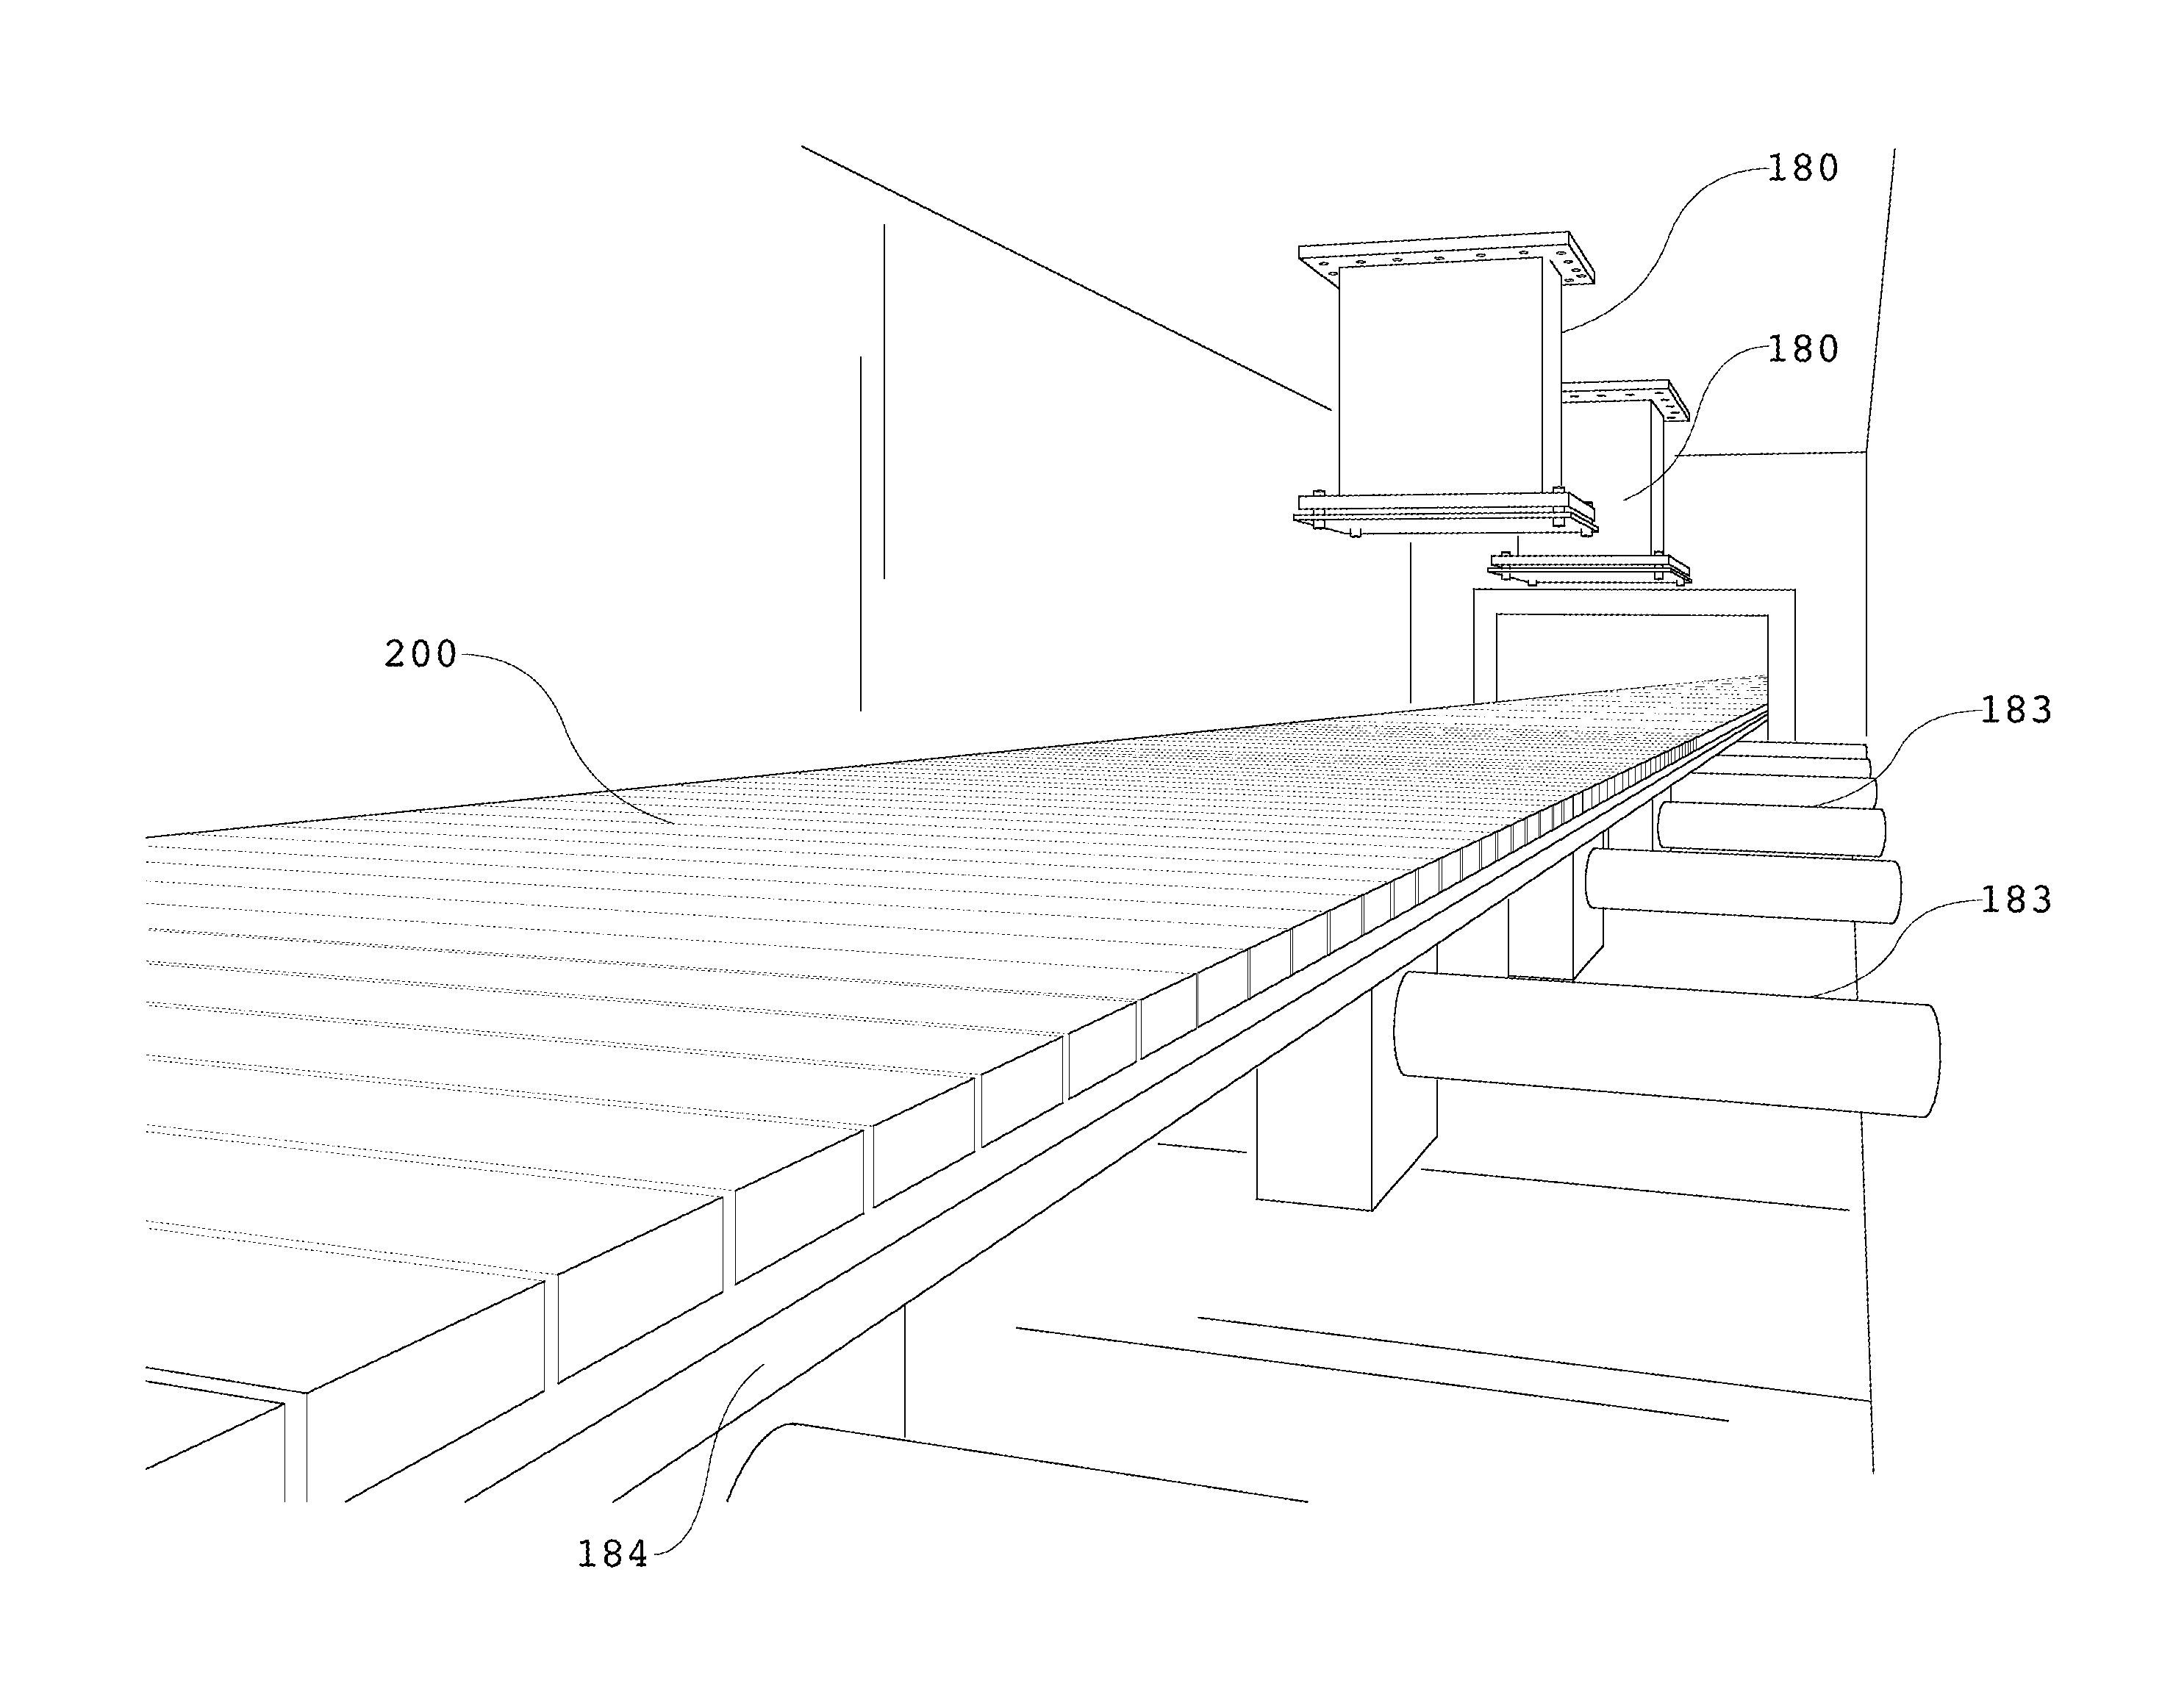 Microwave system and method